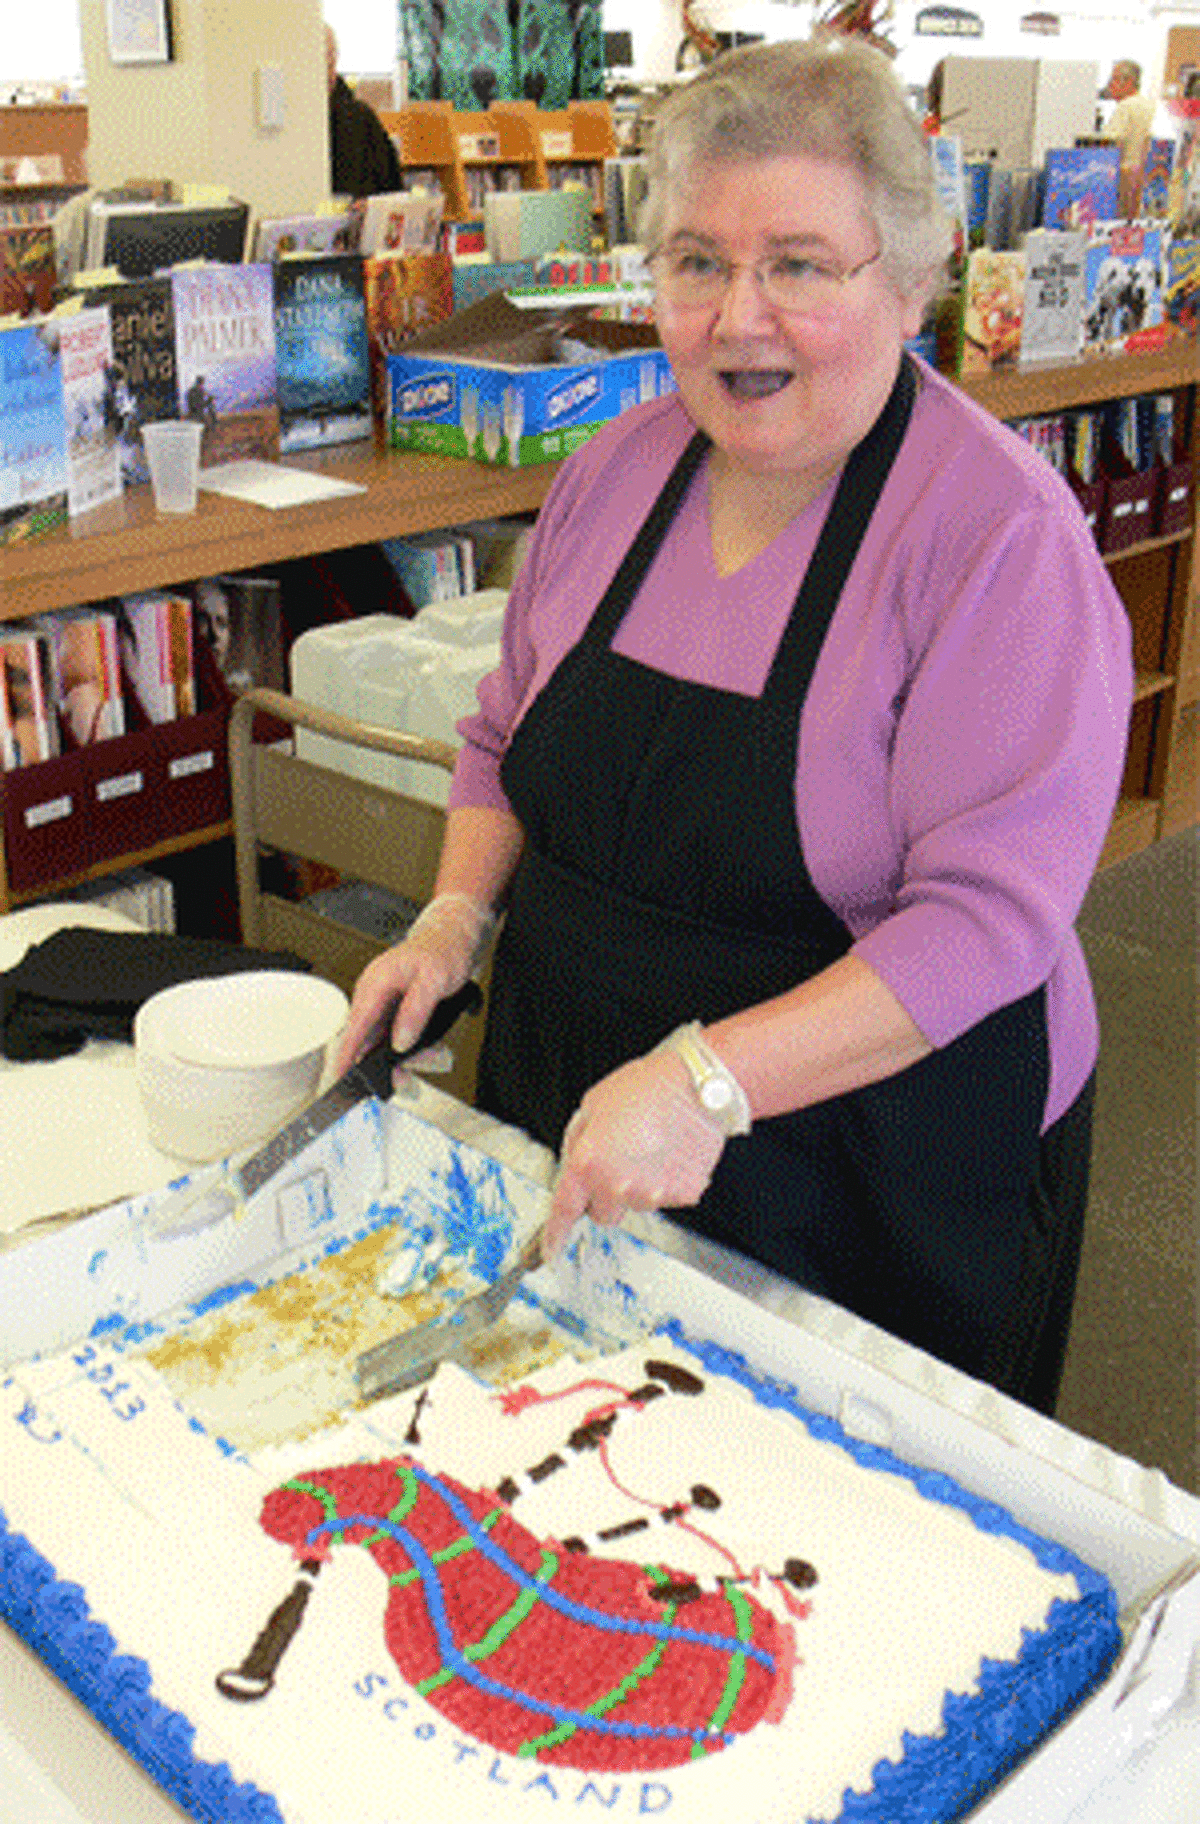 Jo Ann Patters, a library volunteer from Shelton, was distributing cake with a Scottish bagpipe design at the Huntington Branch Library open house.